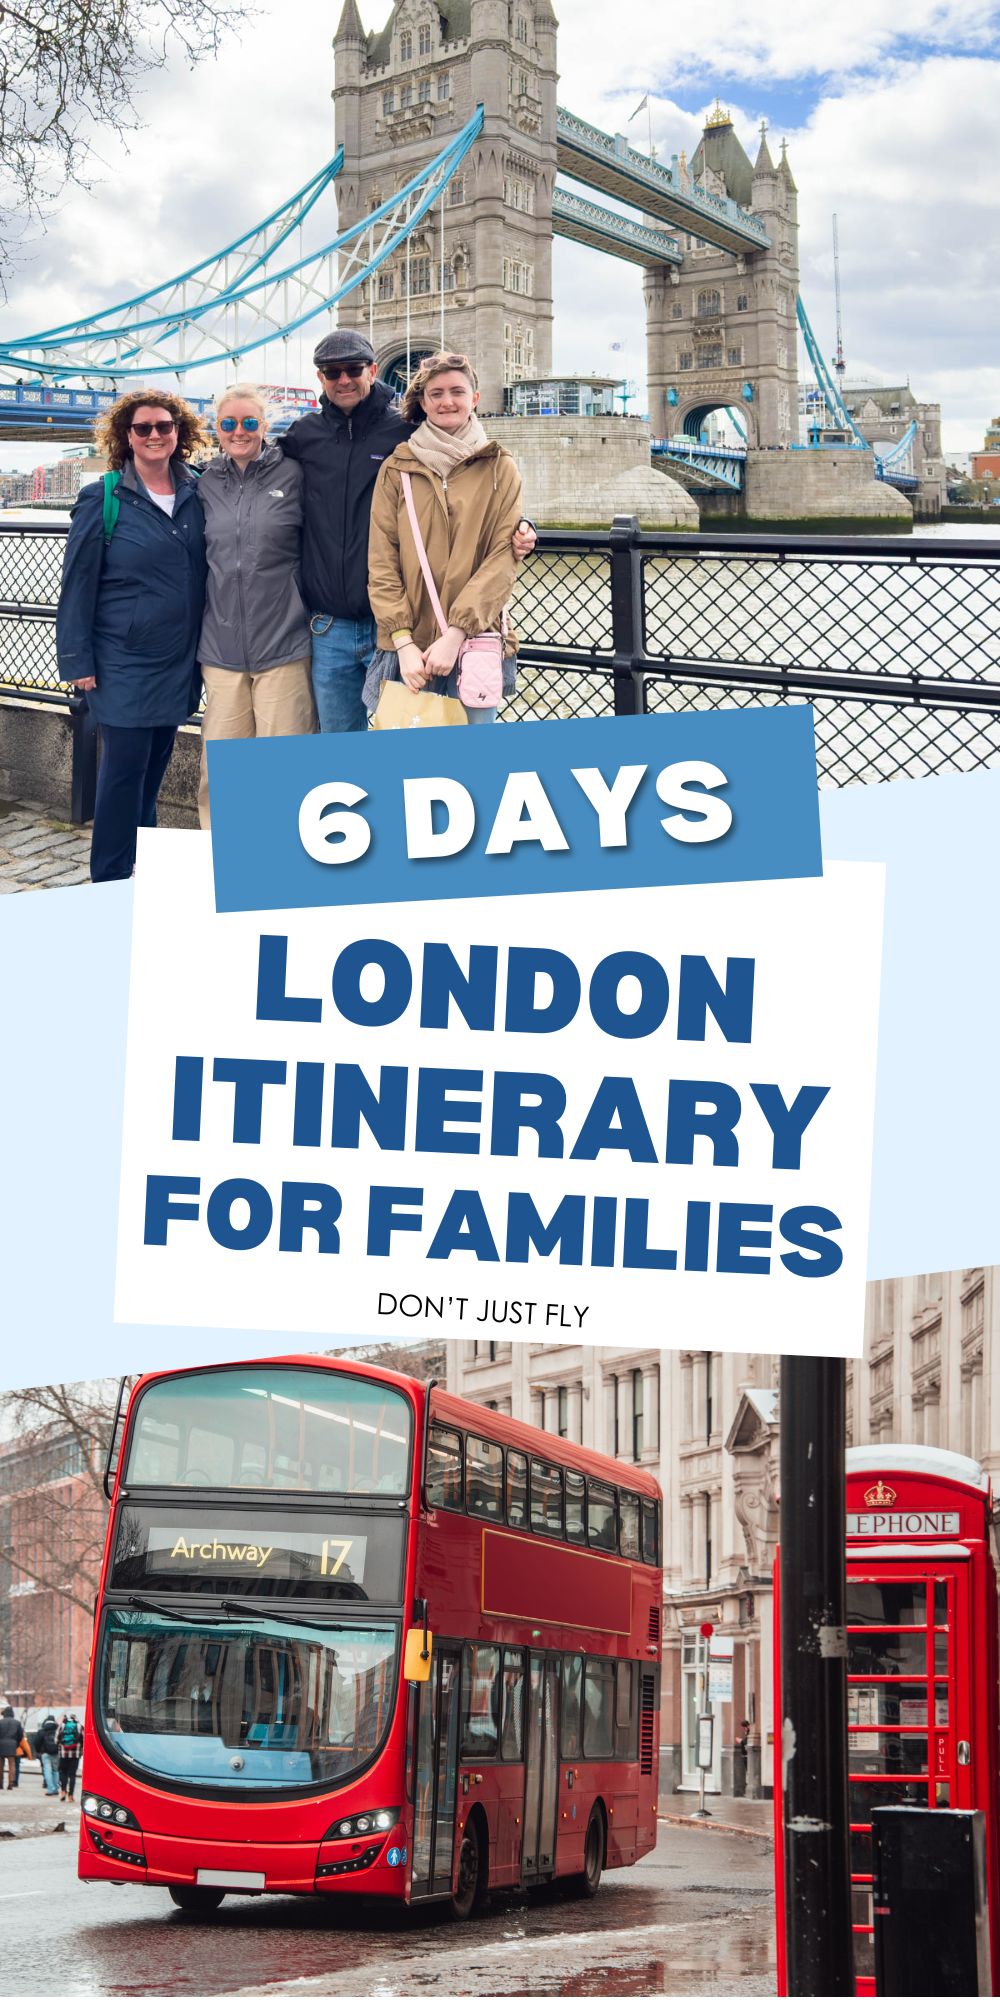 The photo collage shows a family in front of the Tower Bridge next to a photo of a red bus in London.